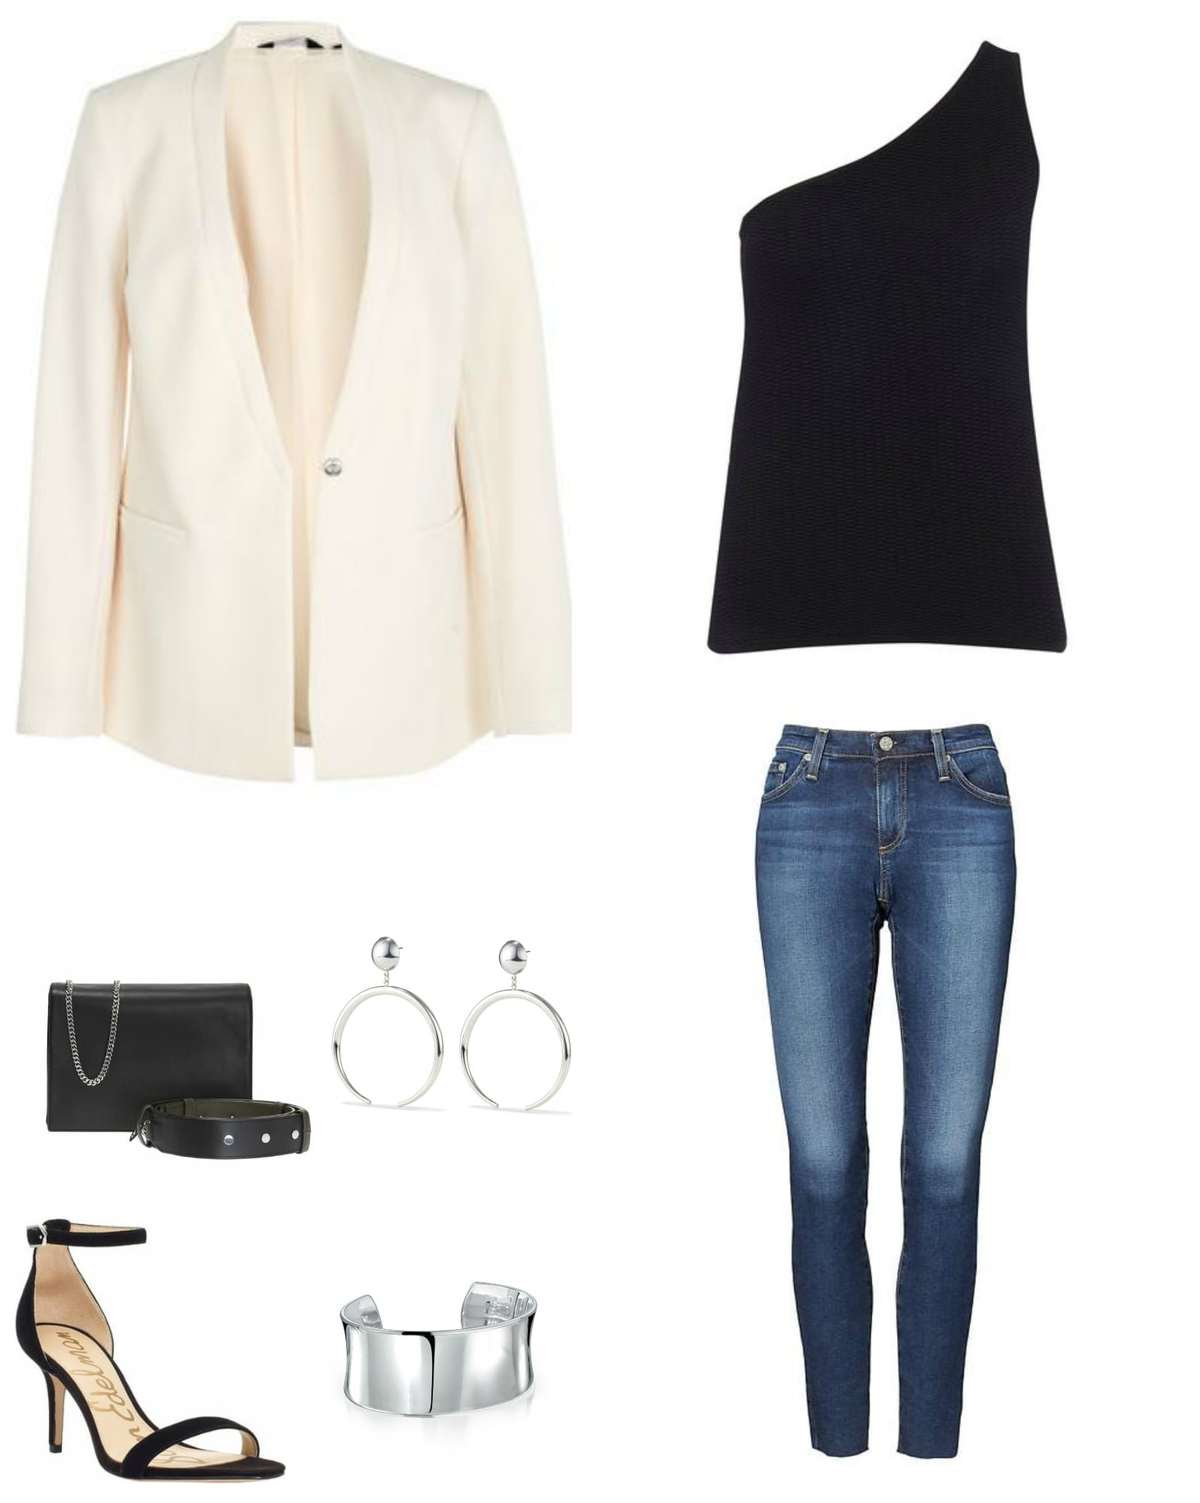 Image is of a black one shoulder sweater styled with skinny jeans and a cream blazer, black handbag, silver statement earrings and cuff bracelet, and black strappy heeled sandals.